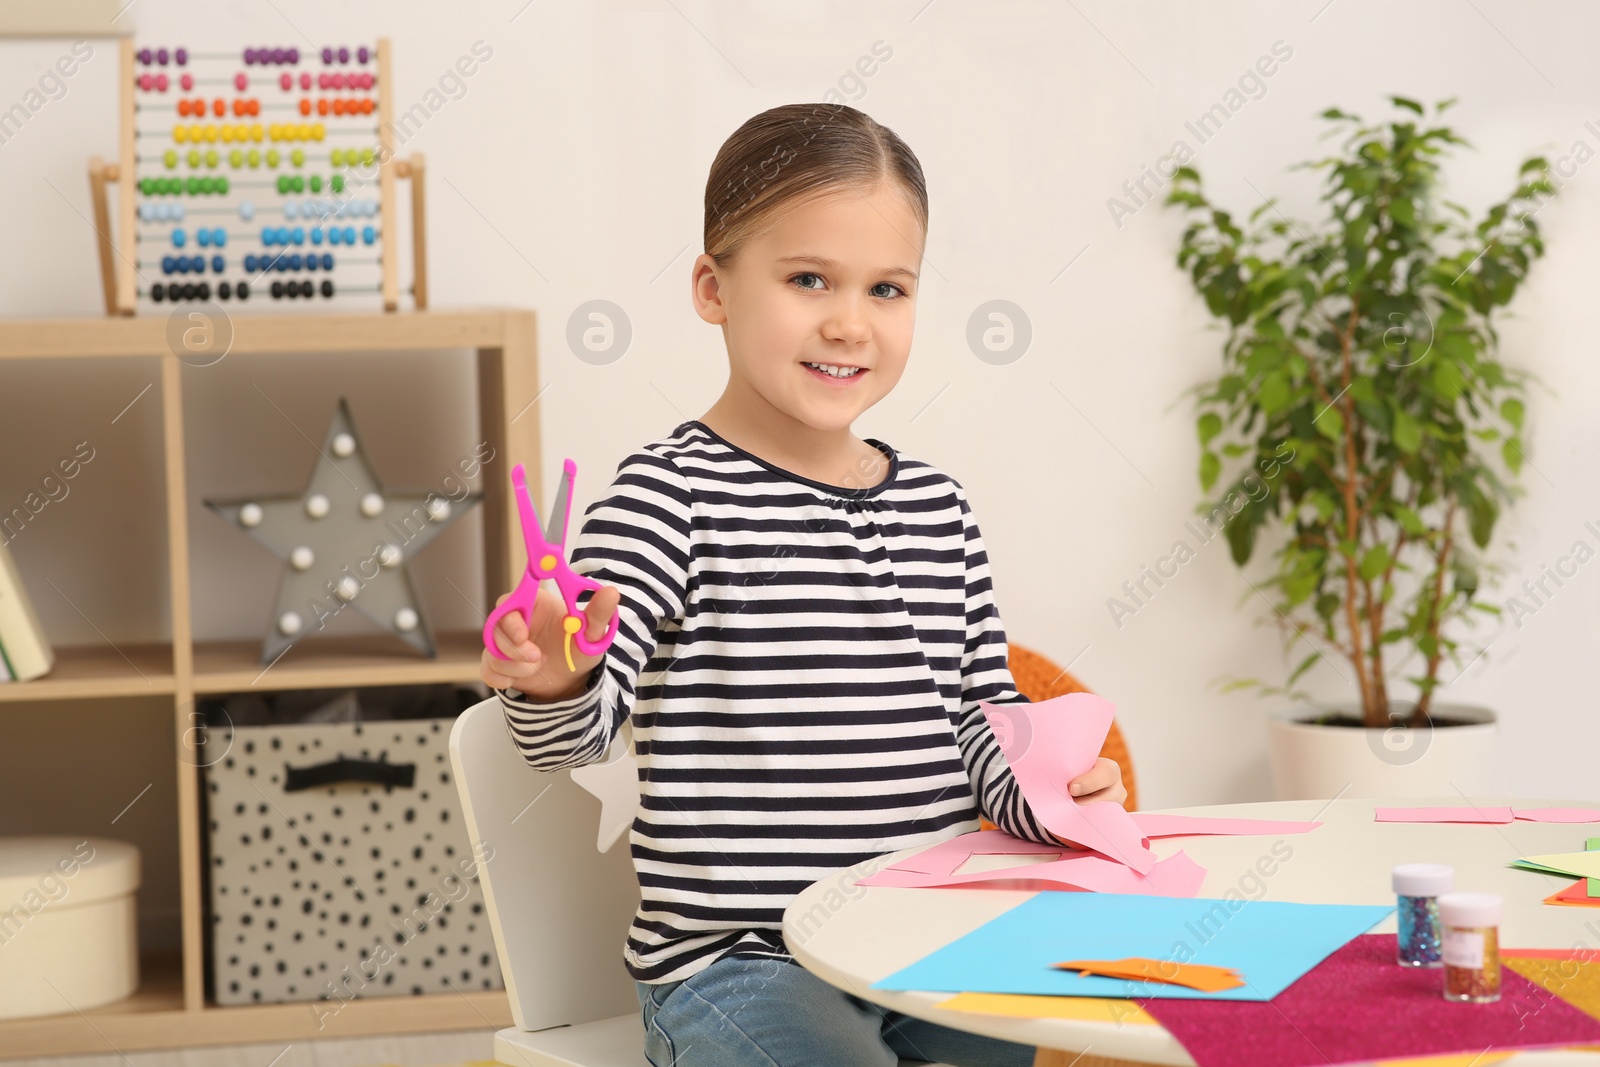 Photo of Cute little girl with scissors and colorful paper at desk in room. Home workplace